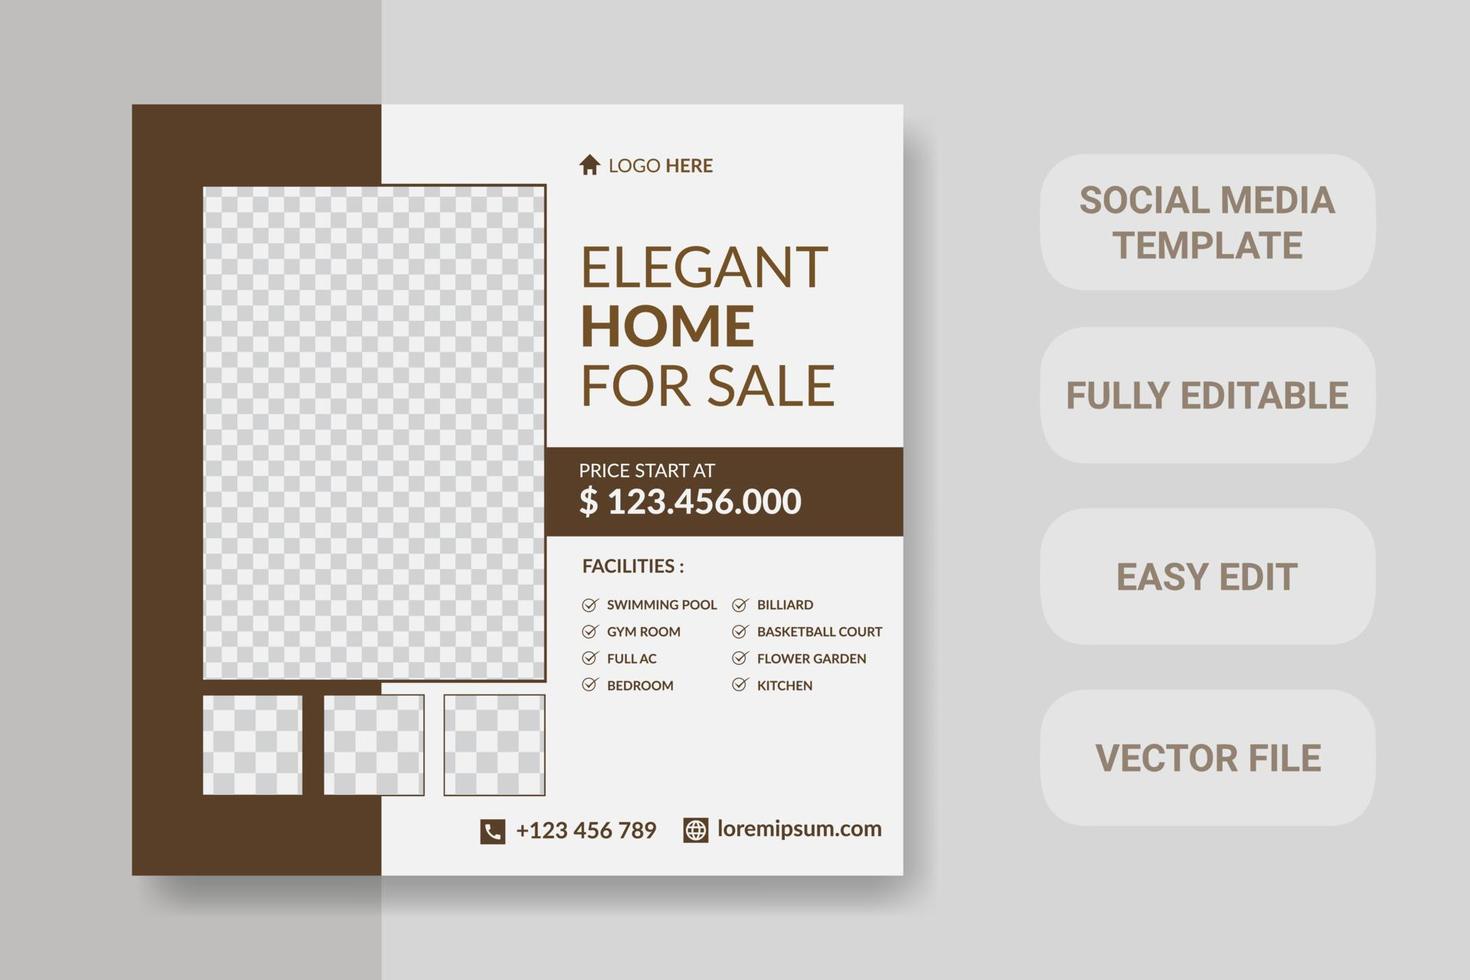 Elegan home for sale social media post banner template design and perfect to online web advertising. vector